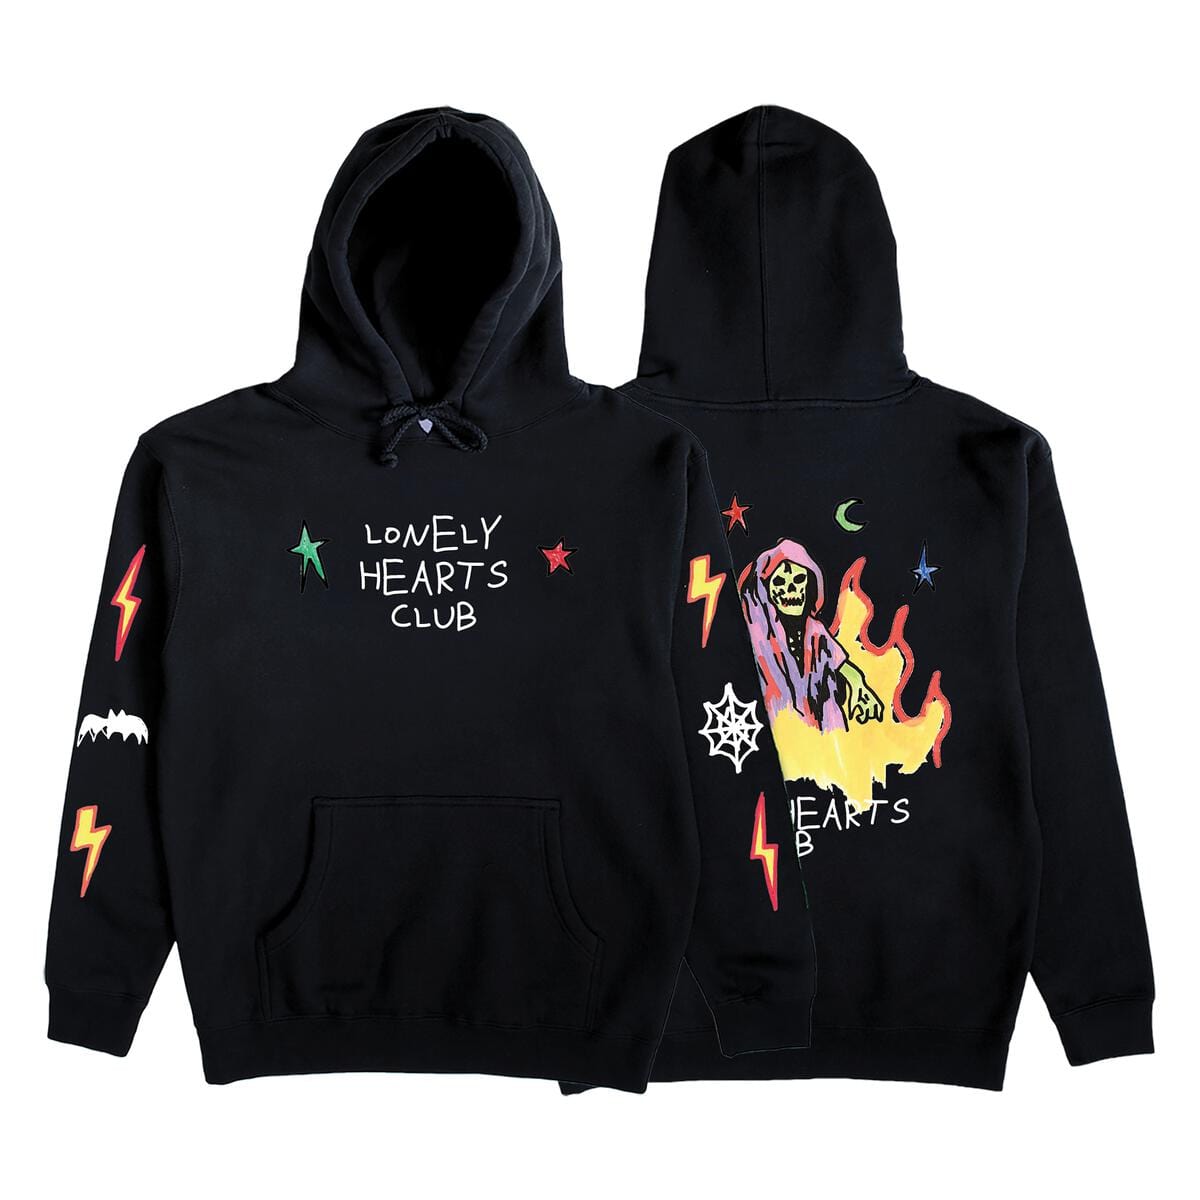 LONLY HEARTS T SHIRT S / black Horror Show Hoodie